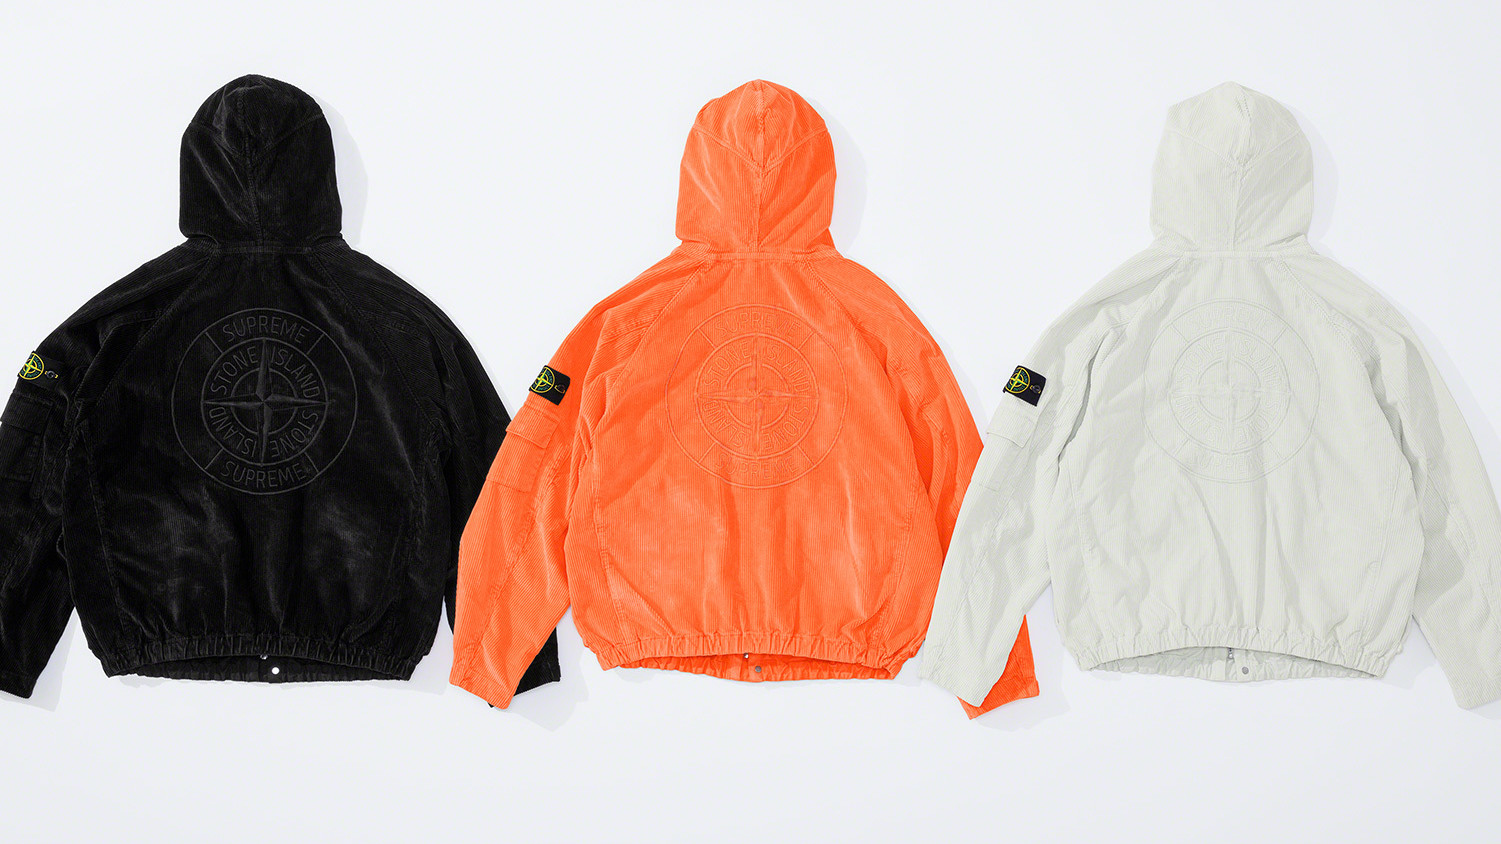 Best Style Releases This Week: Supreme x Stone Island, Stüssy